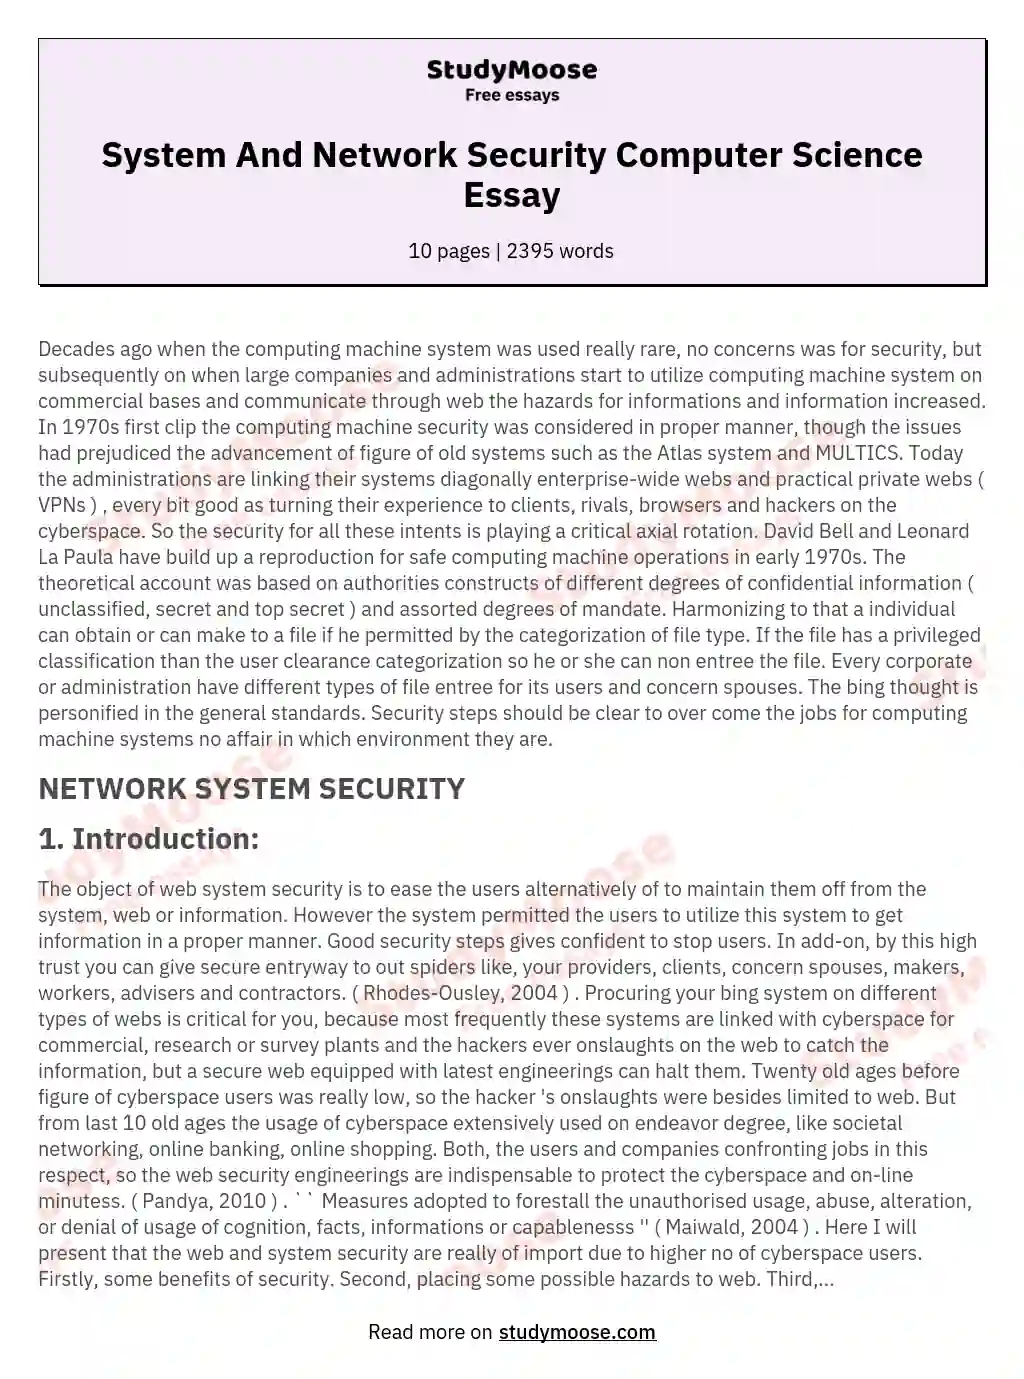 System And Network Security Computer Science Essay